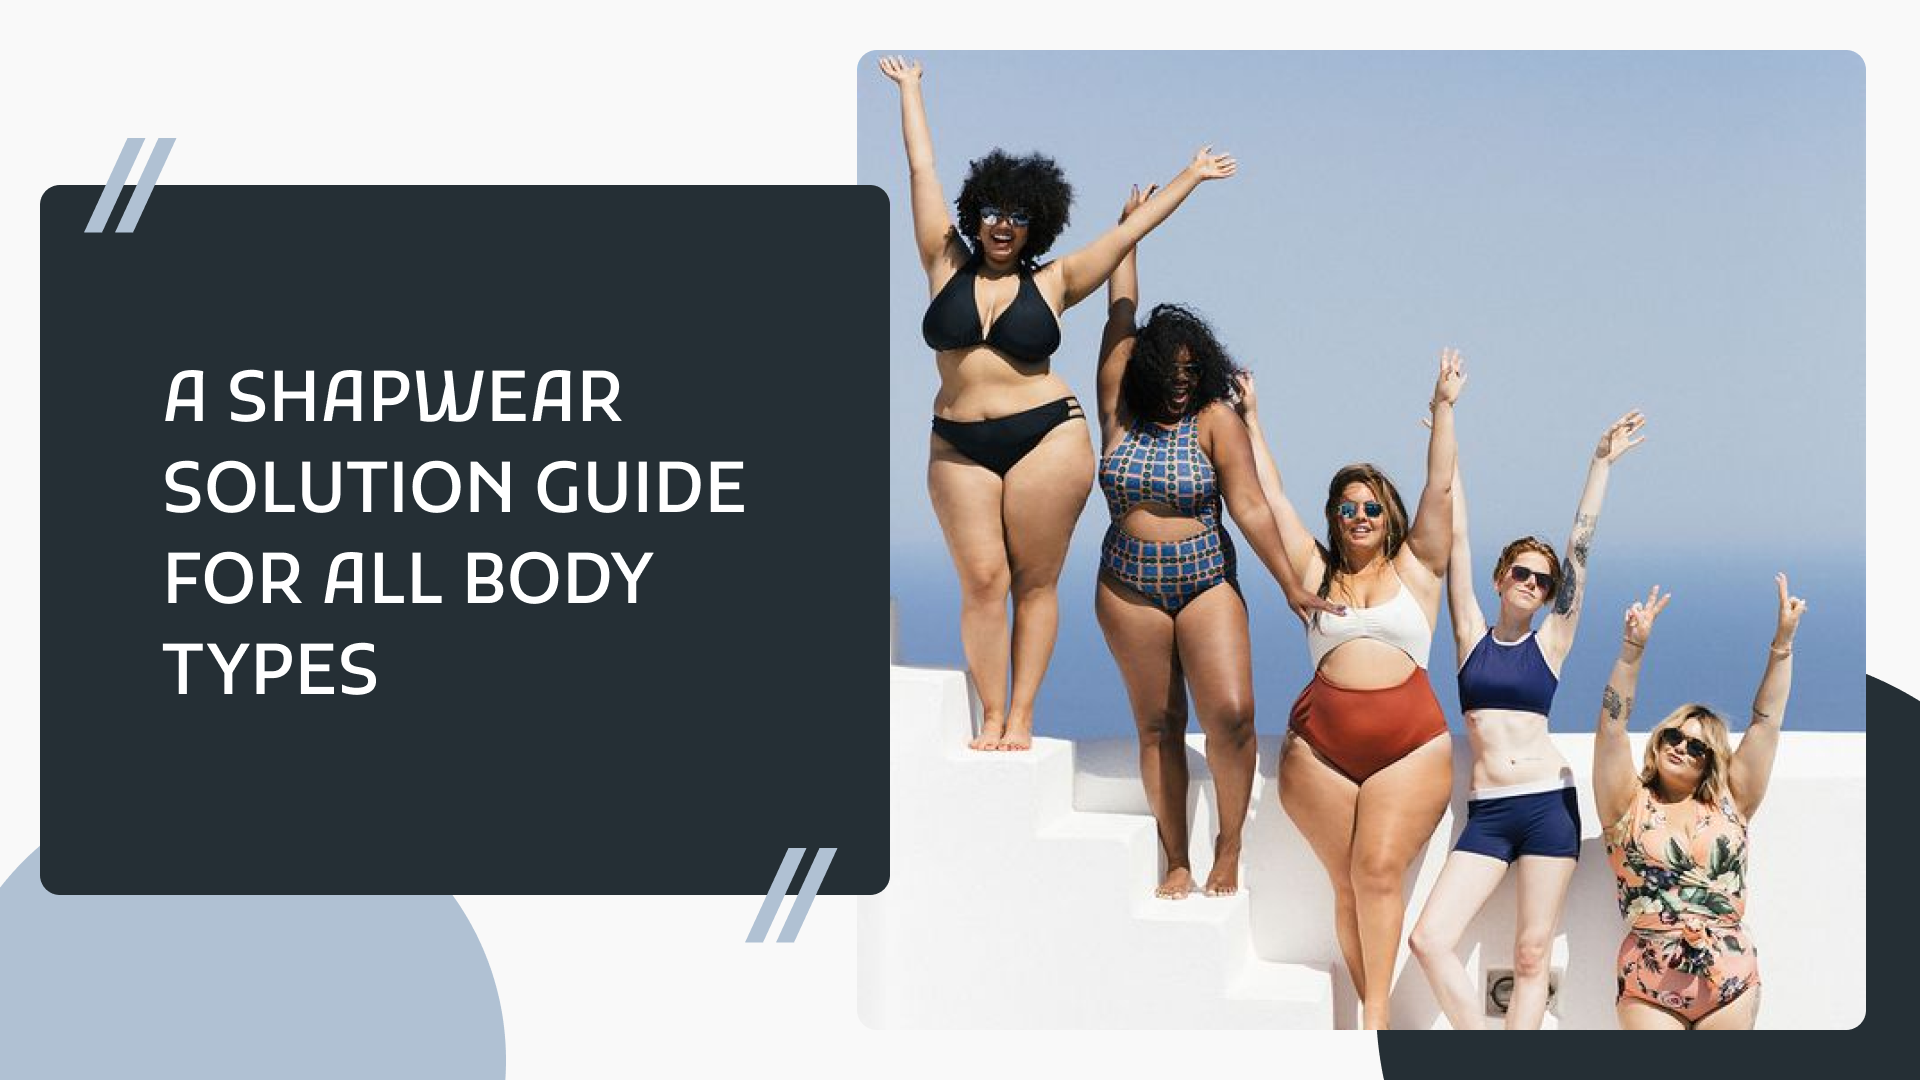 A Shapewear Solution Guide for All Body Types